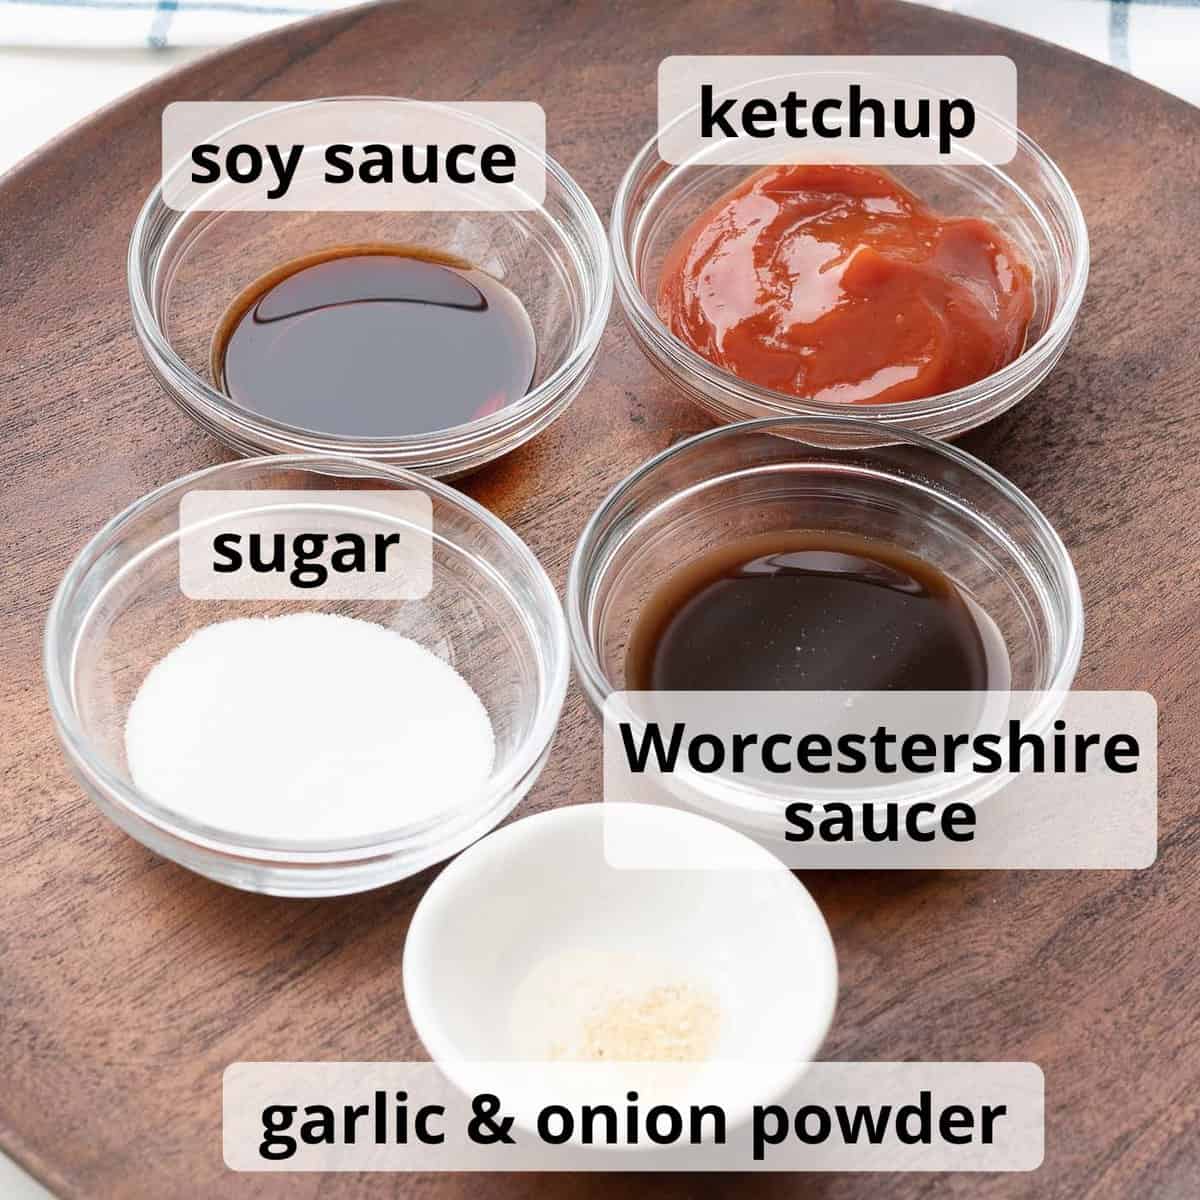 Ingredients for tonkatsu sauce with text labels.